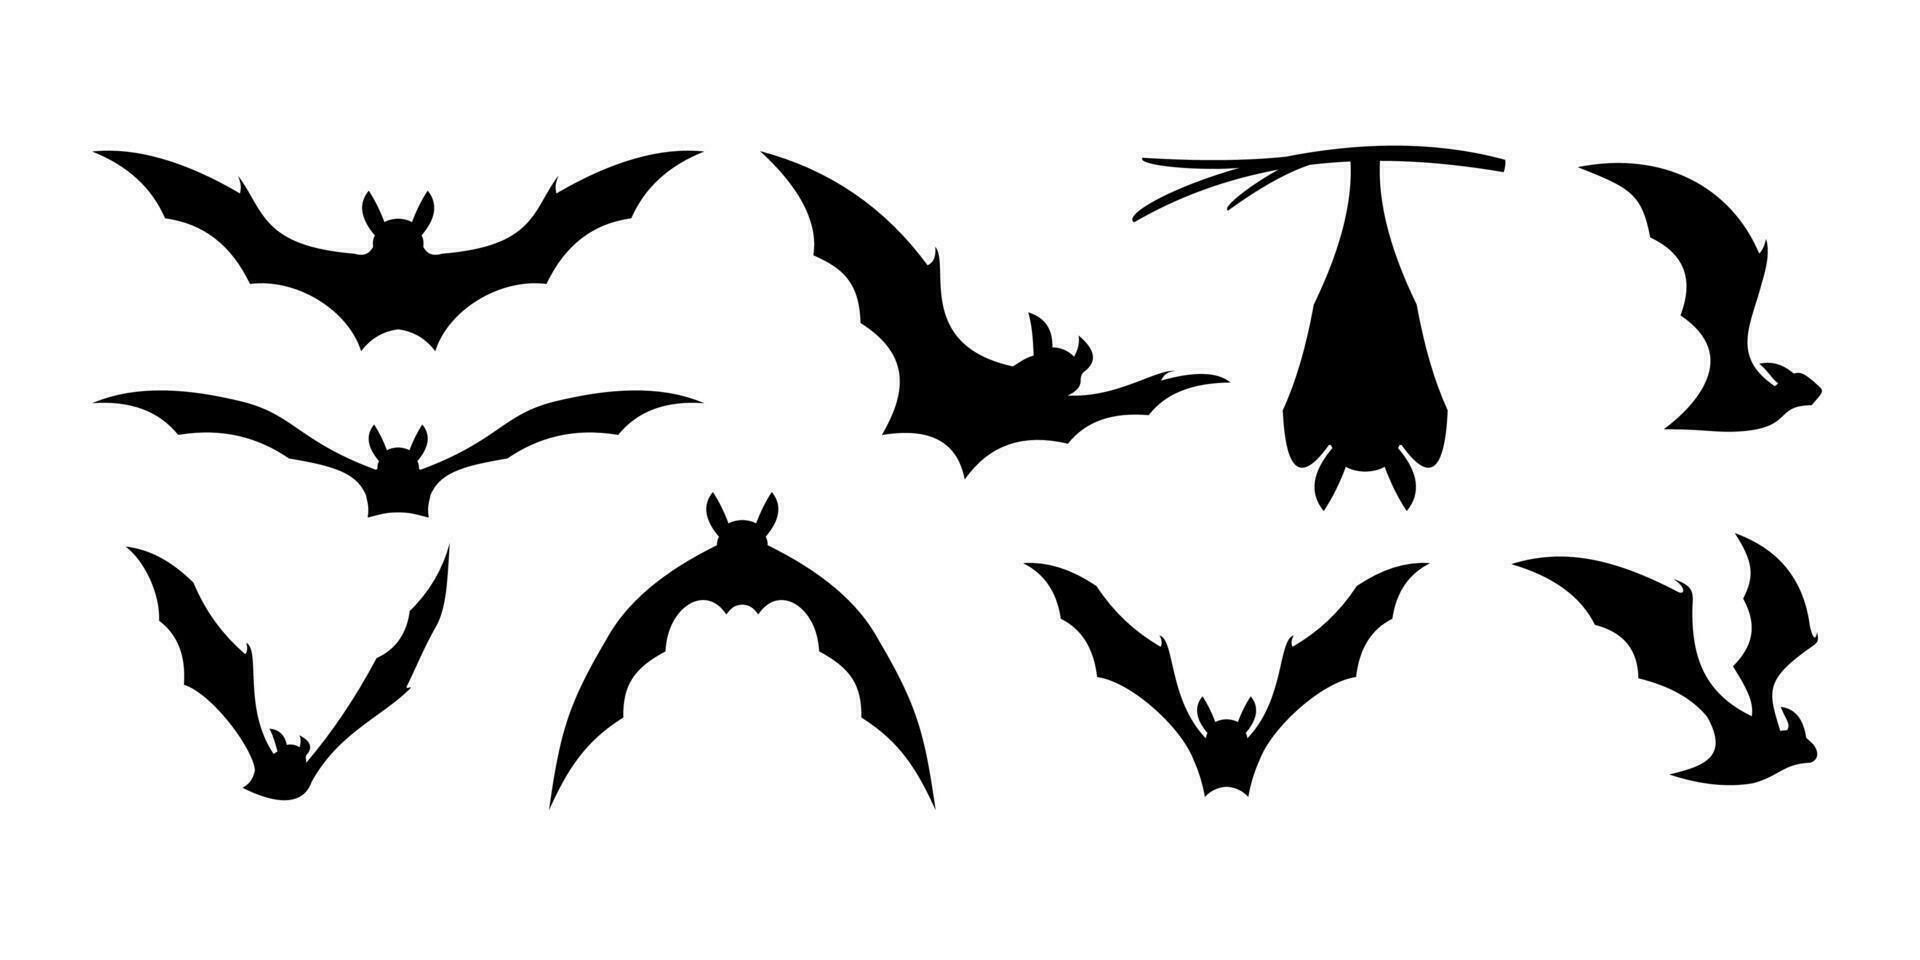 silhouettes of bats in different poses, bat vector